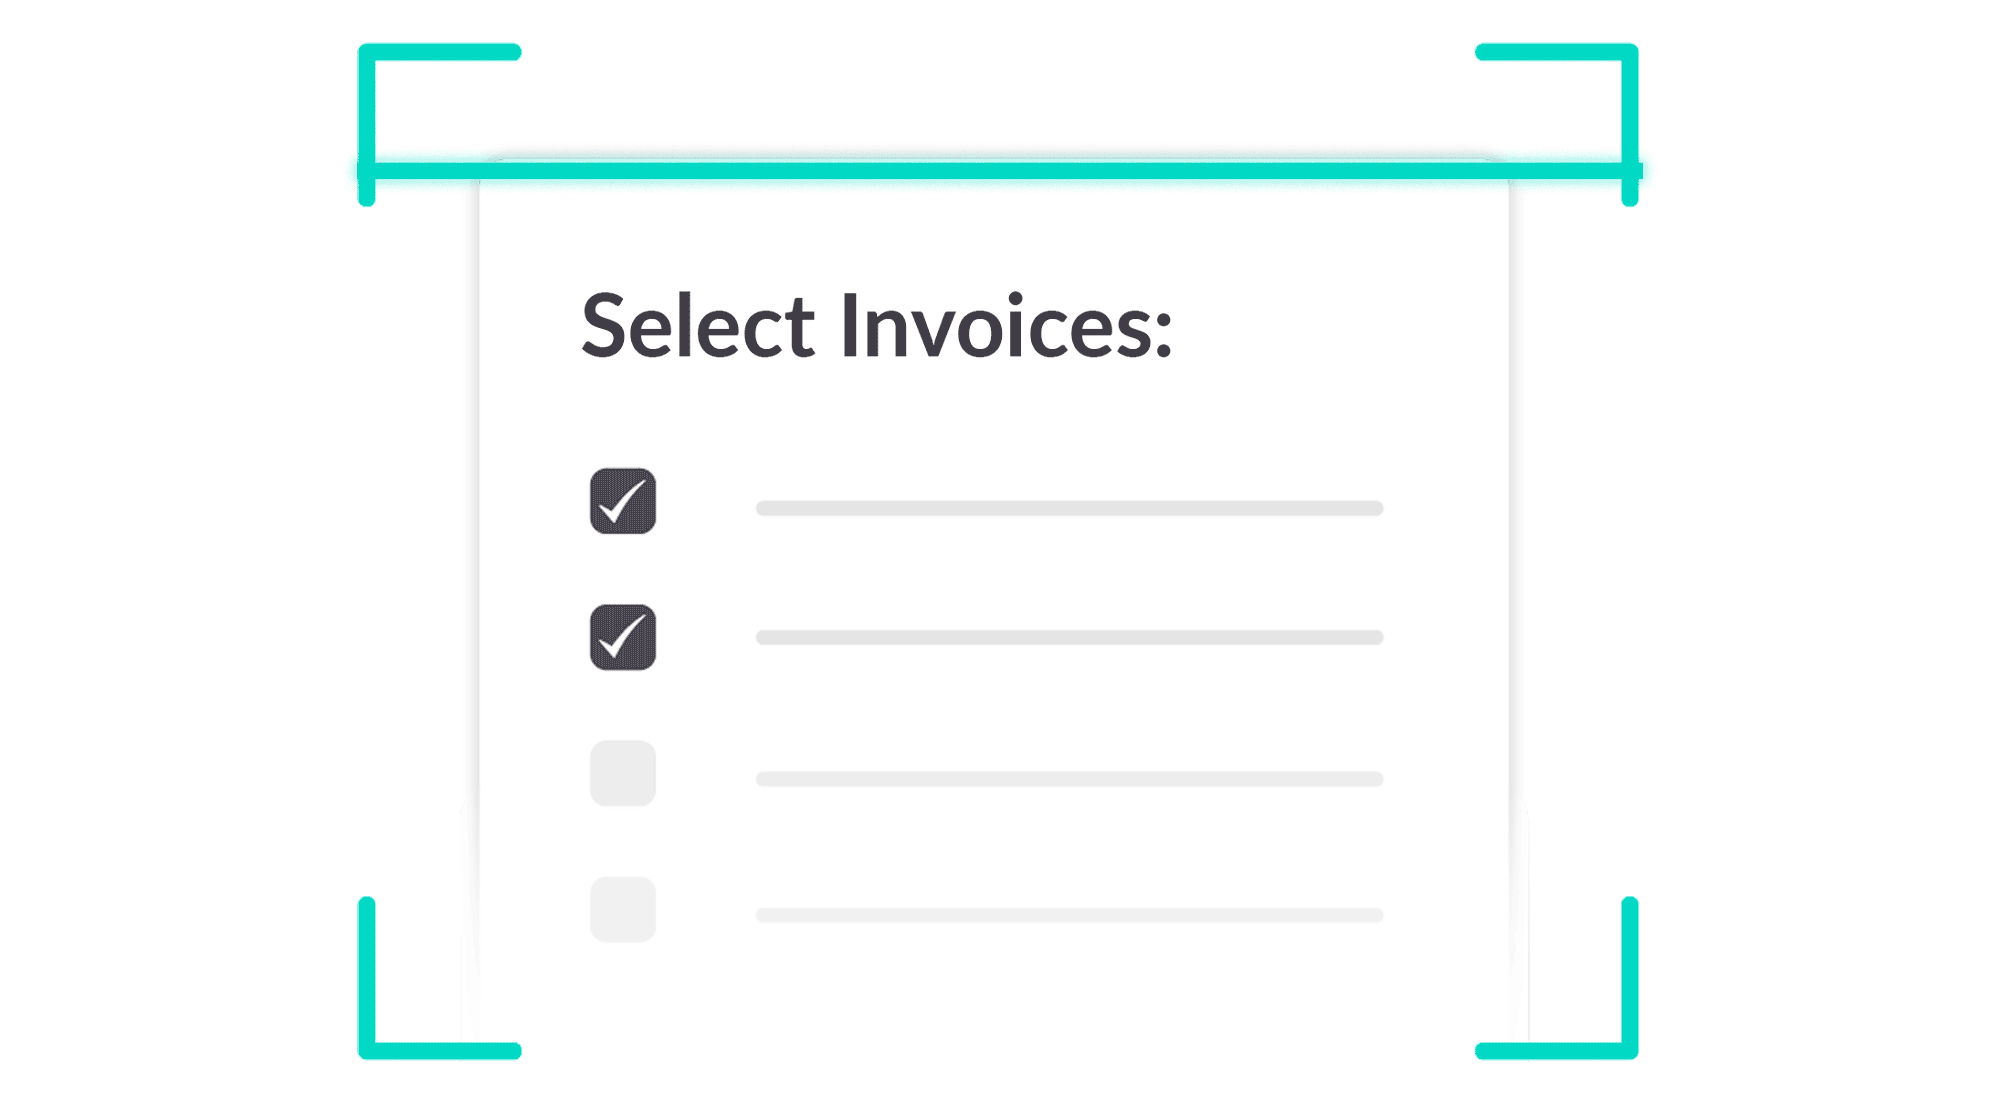 Select and scan multiple invoices at once